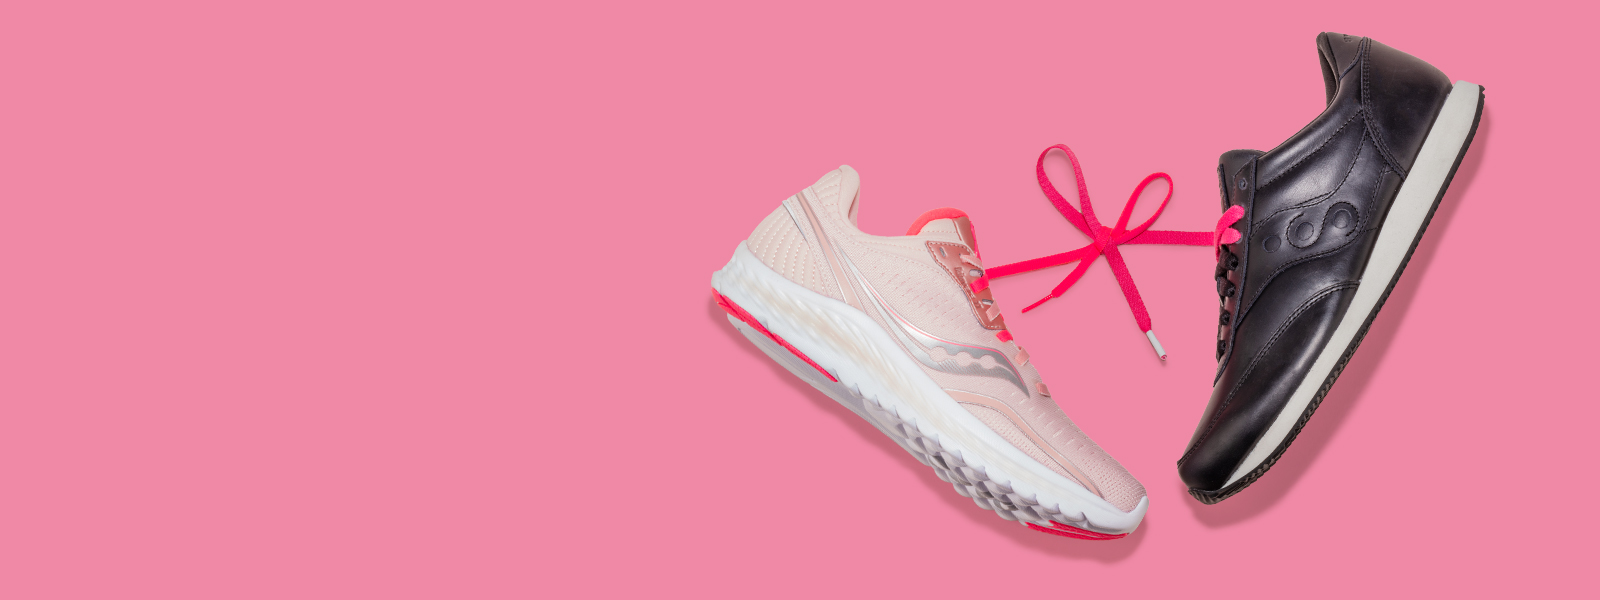 saucony breast cancer shoes